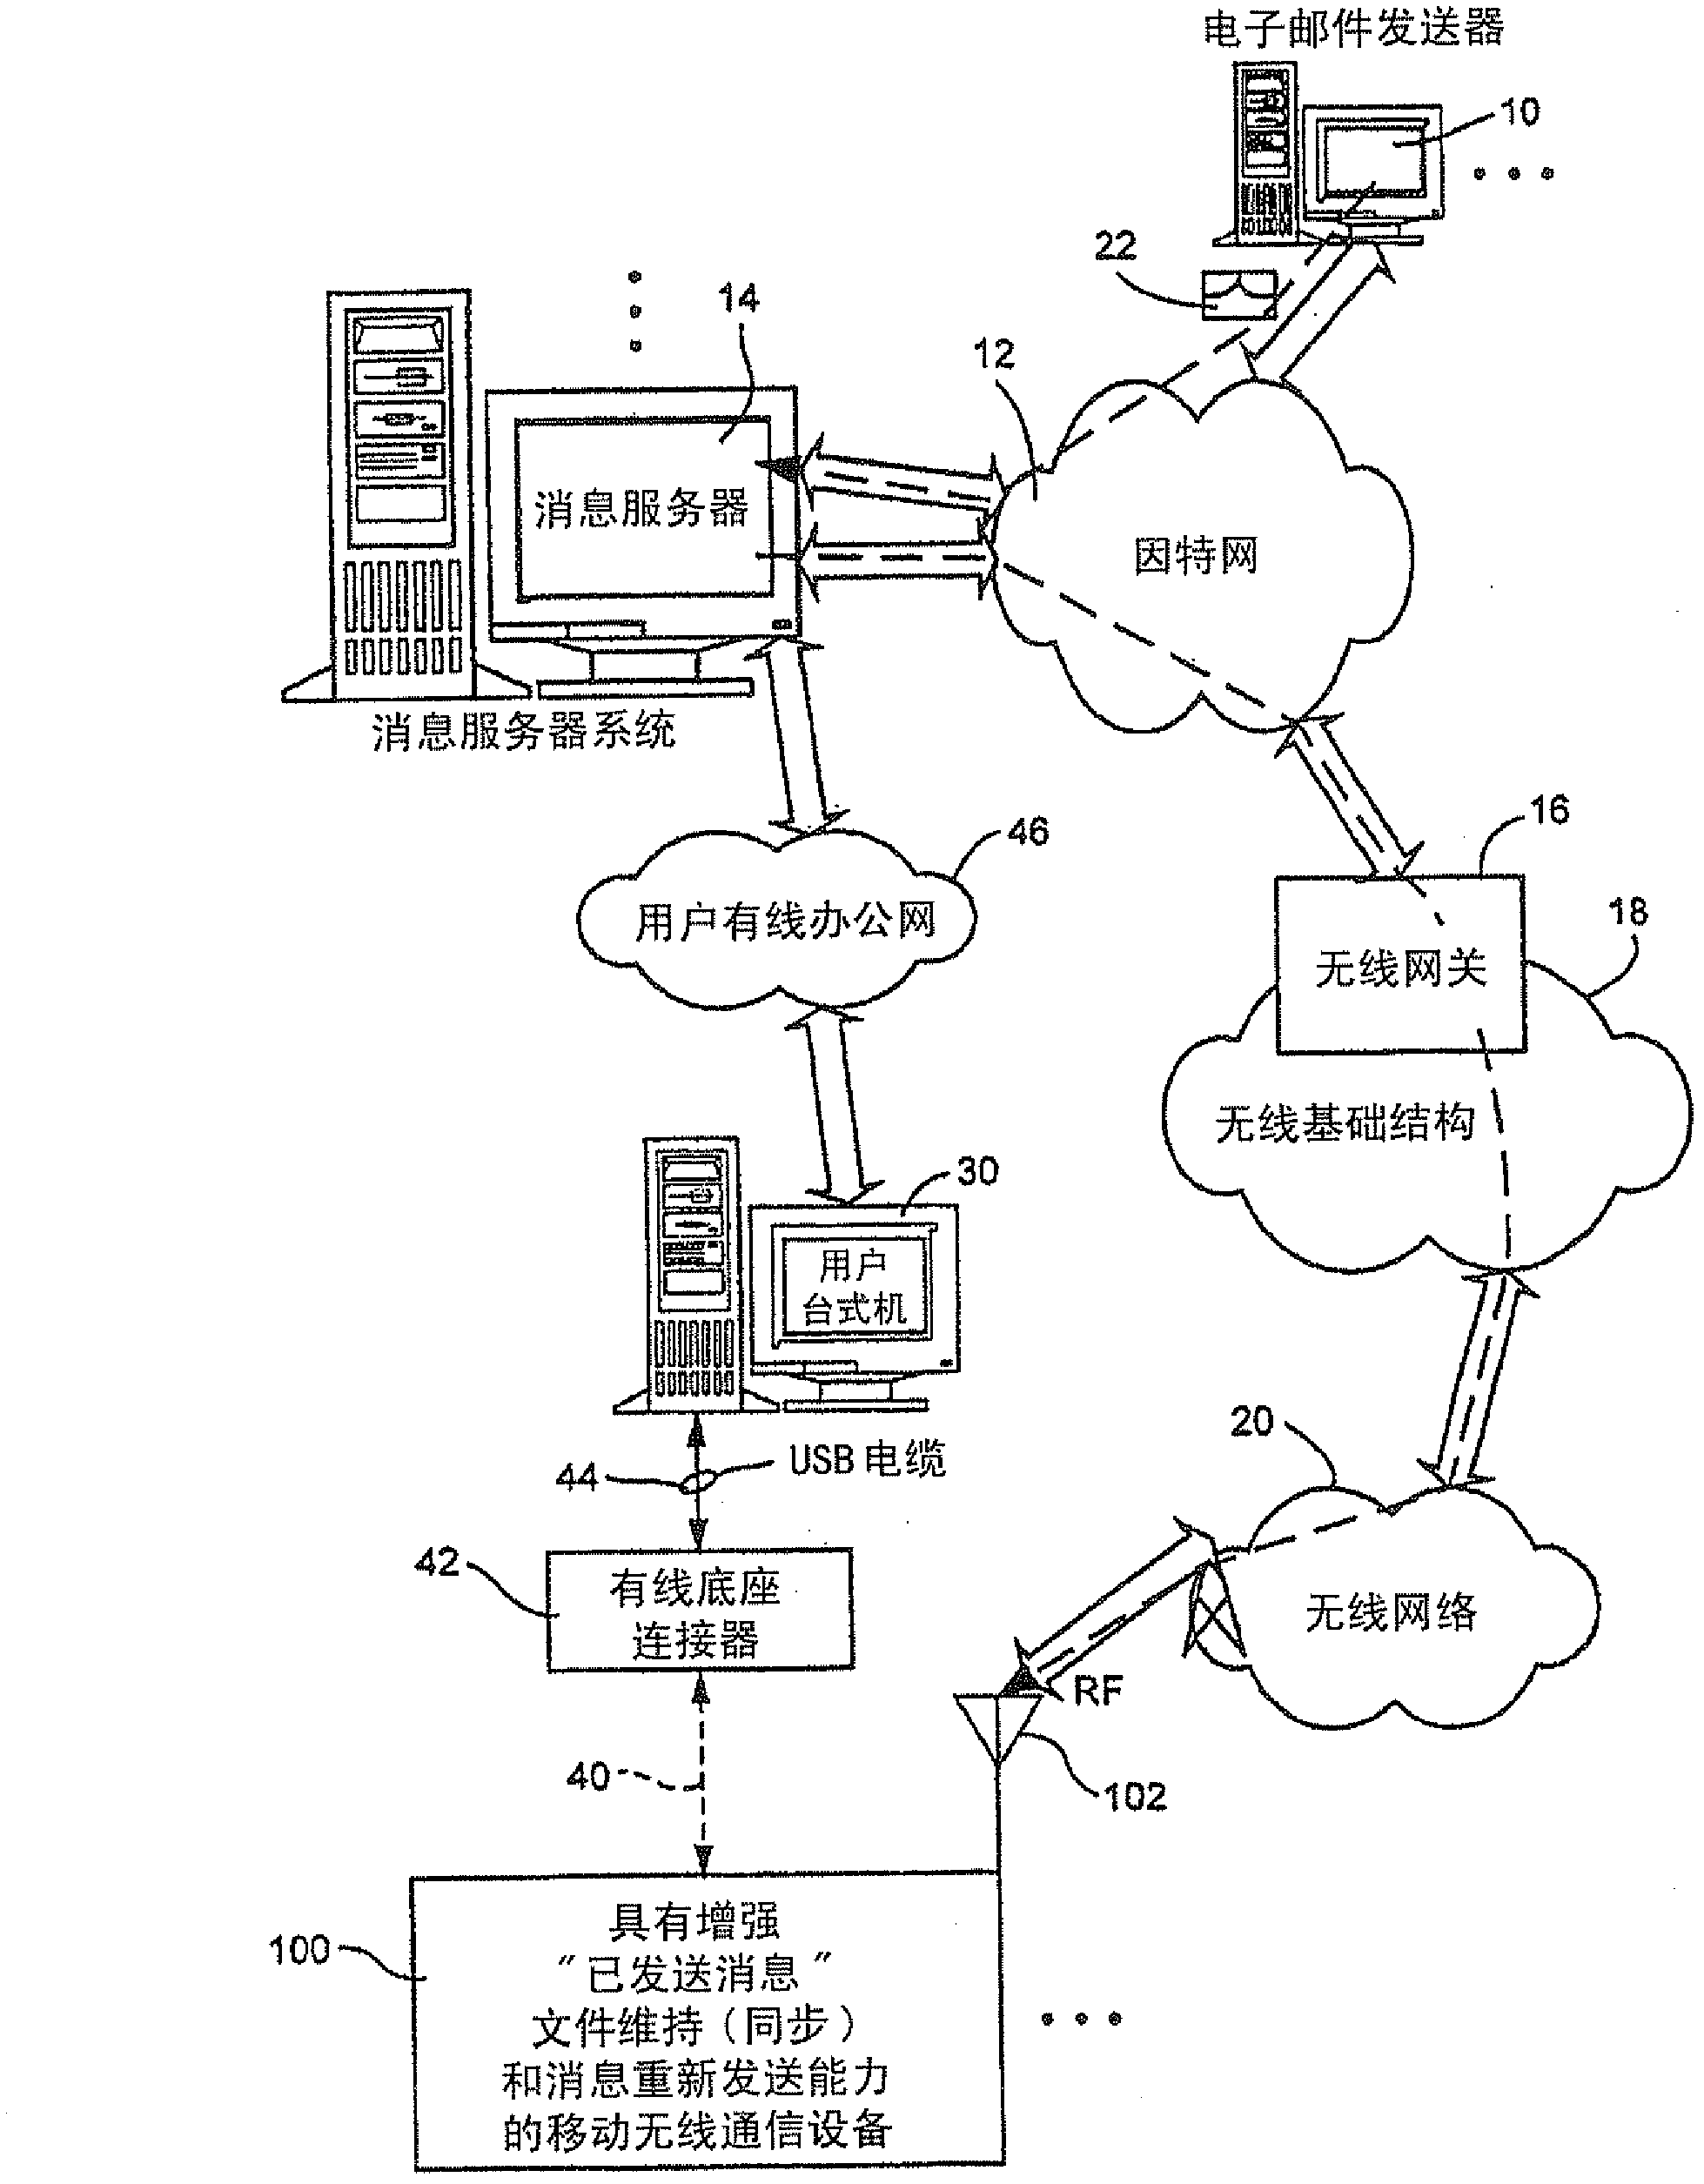 Method and apparatus for efficient resending of messages using message id